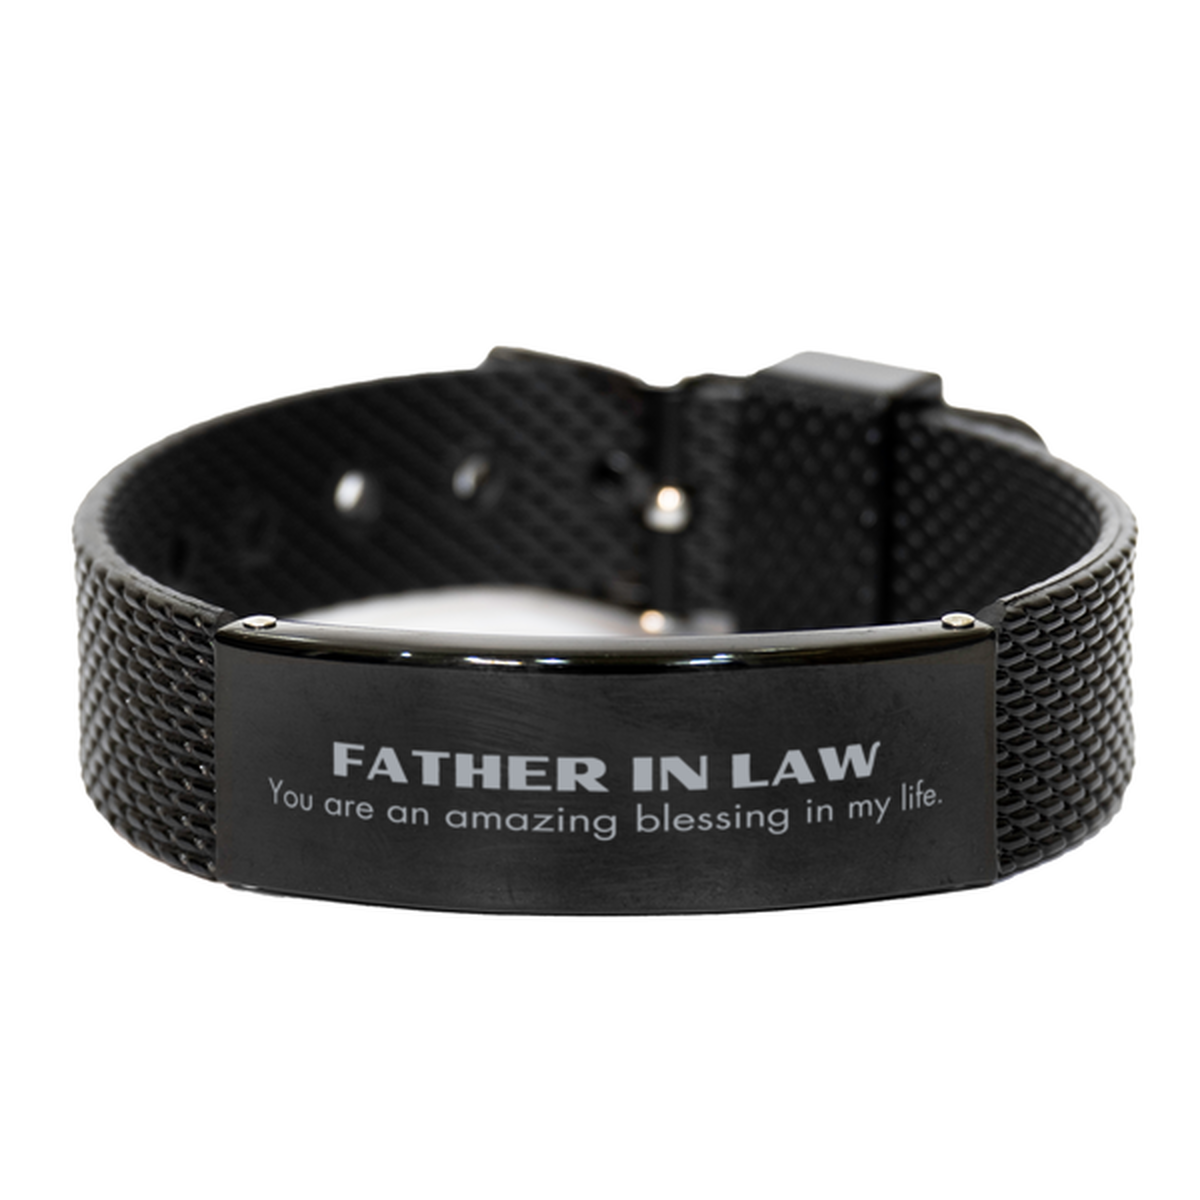 Father In Law Black Shark Mesh Bracelet, You are an amazing blessing in my life, Thank You Gifts For Father In Law, Inspirational Birthday Christmas Unique Gifts For Father In Law